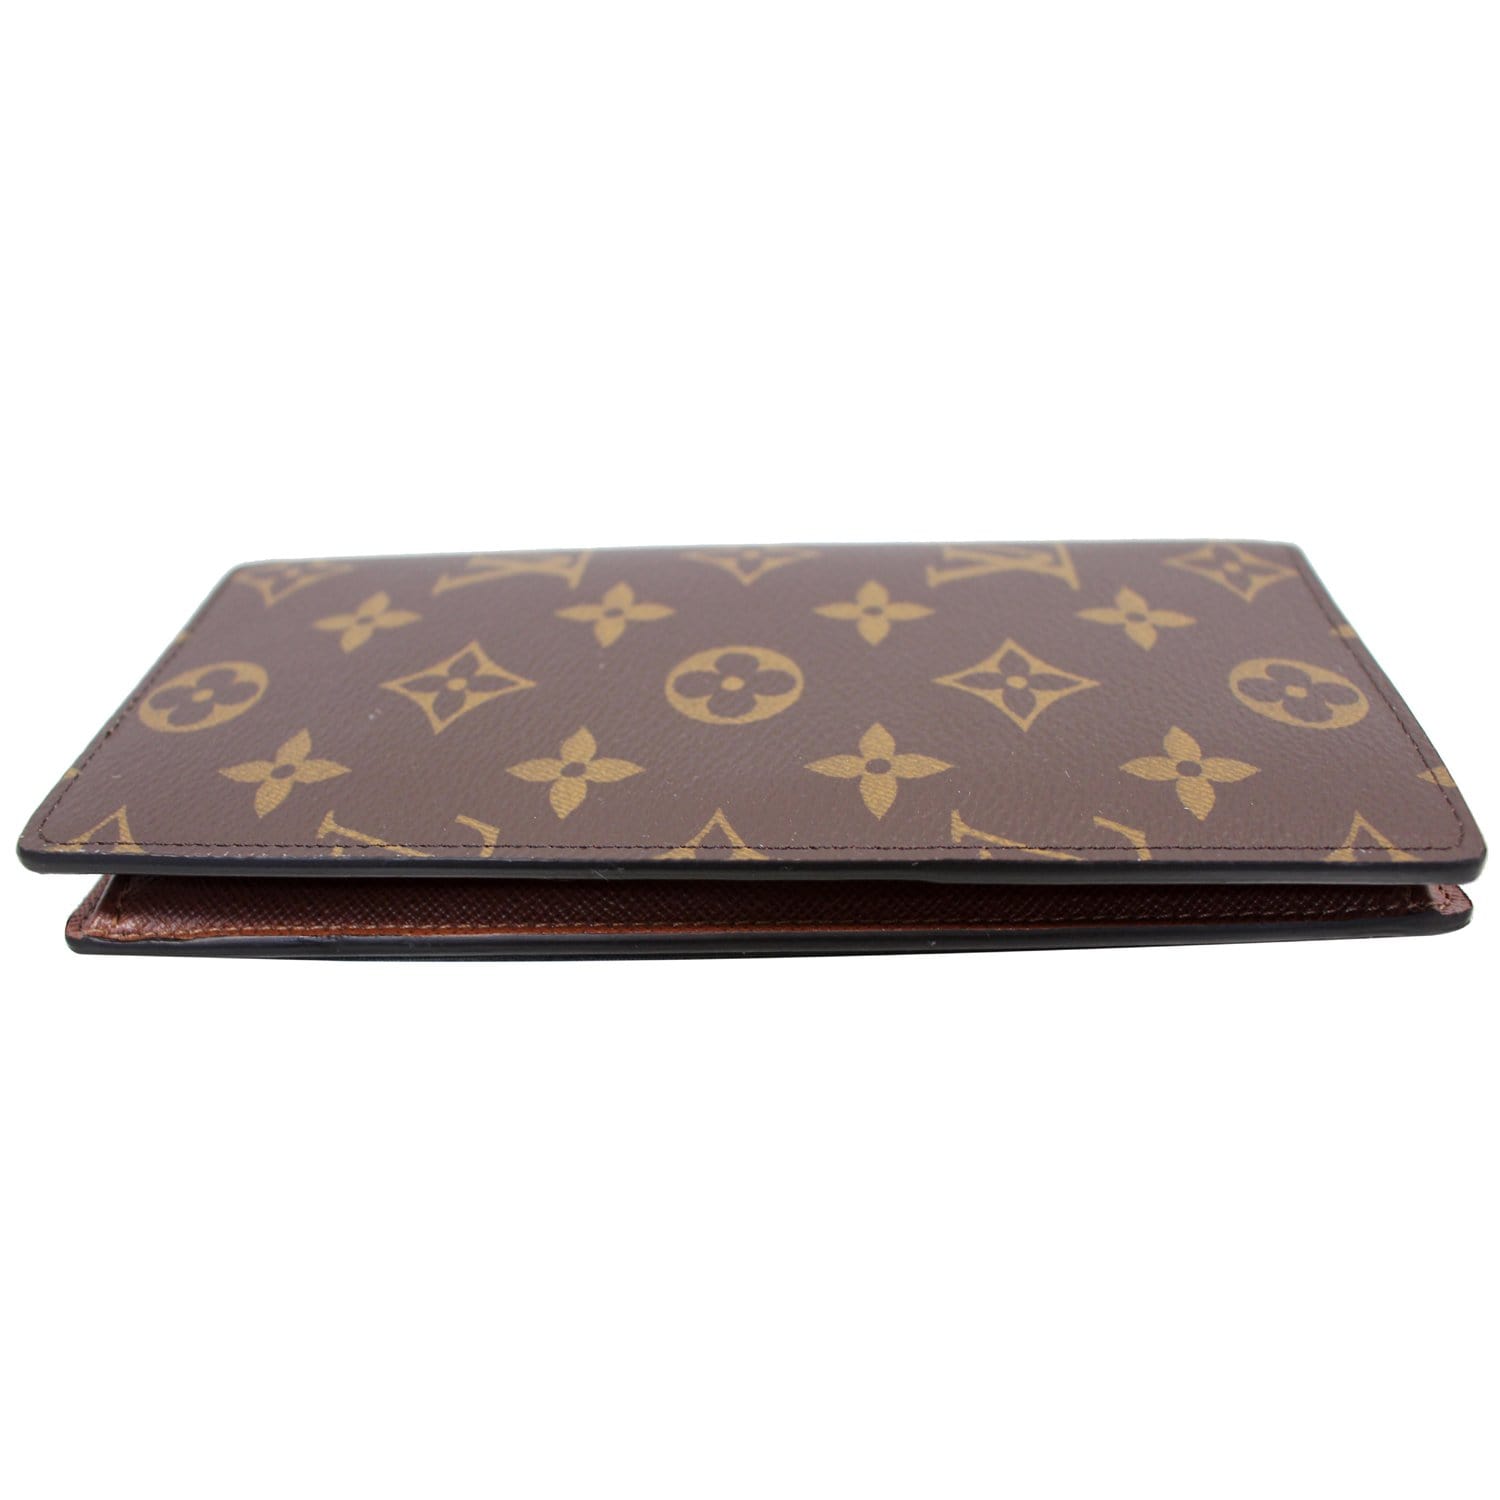 e-glampot.com on Instagram: 7501-1 M66540 Brazza Wallet in Monogram Canvas  *RFID* Condition: New 10/10 Remarks: Brand new, kept unused. Includes:  receipt (28/11/22, Midvalley), message card + ribbonb, dustbag, box and  paperbag Current